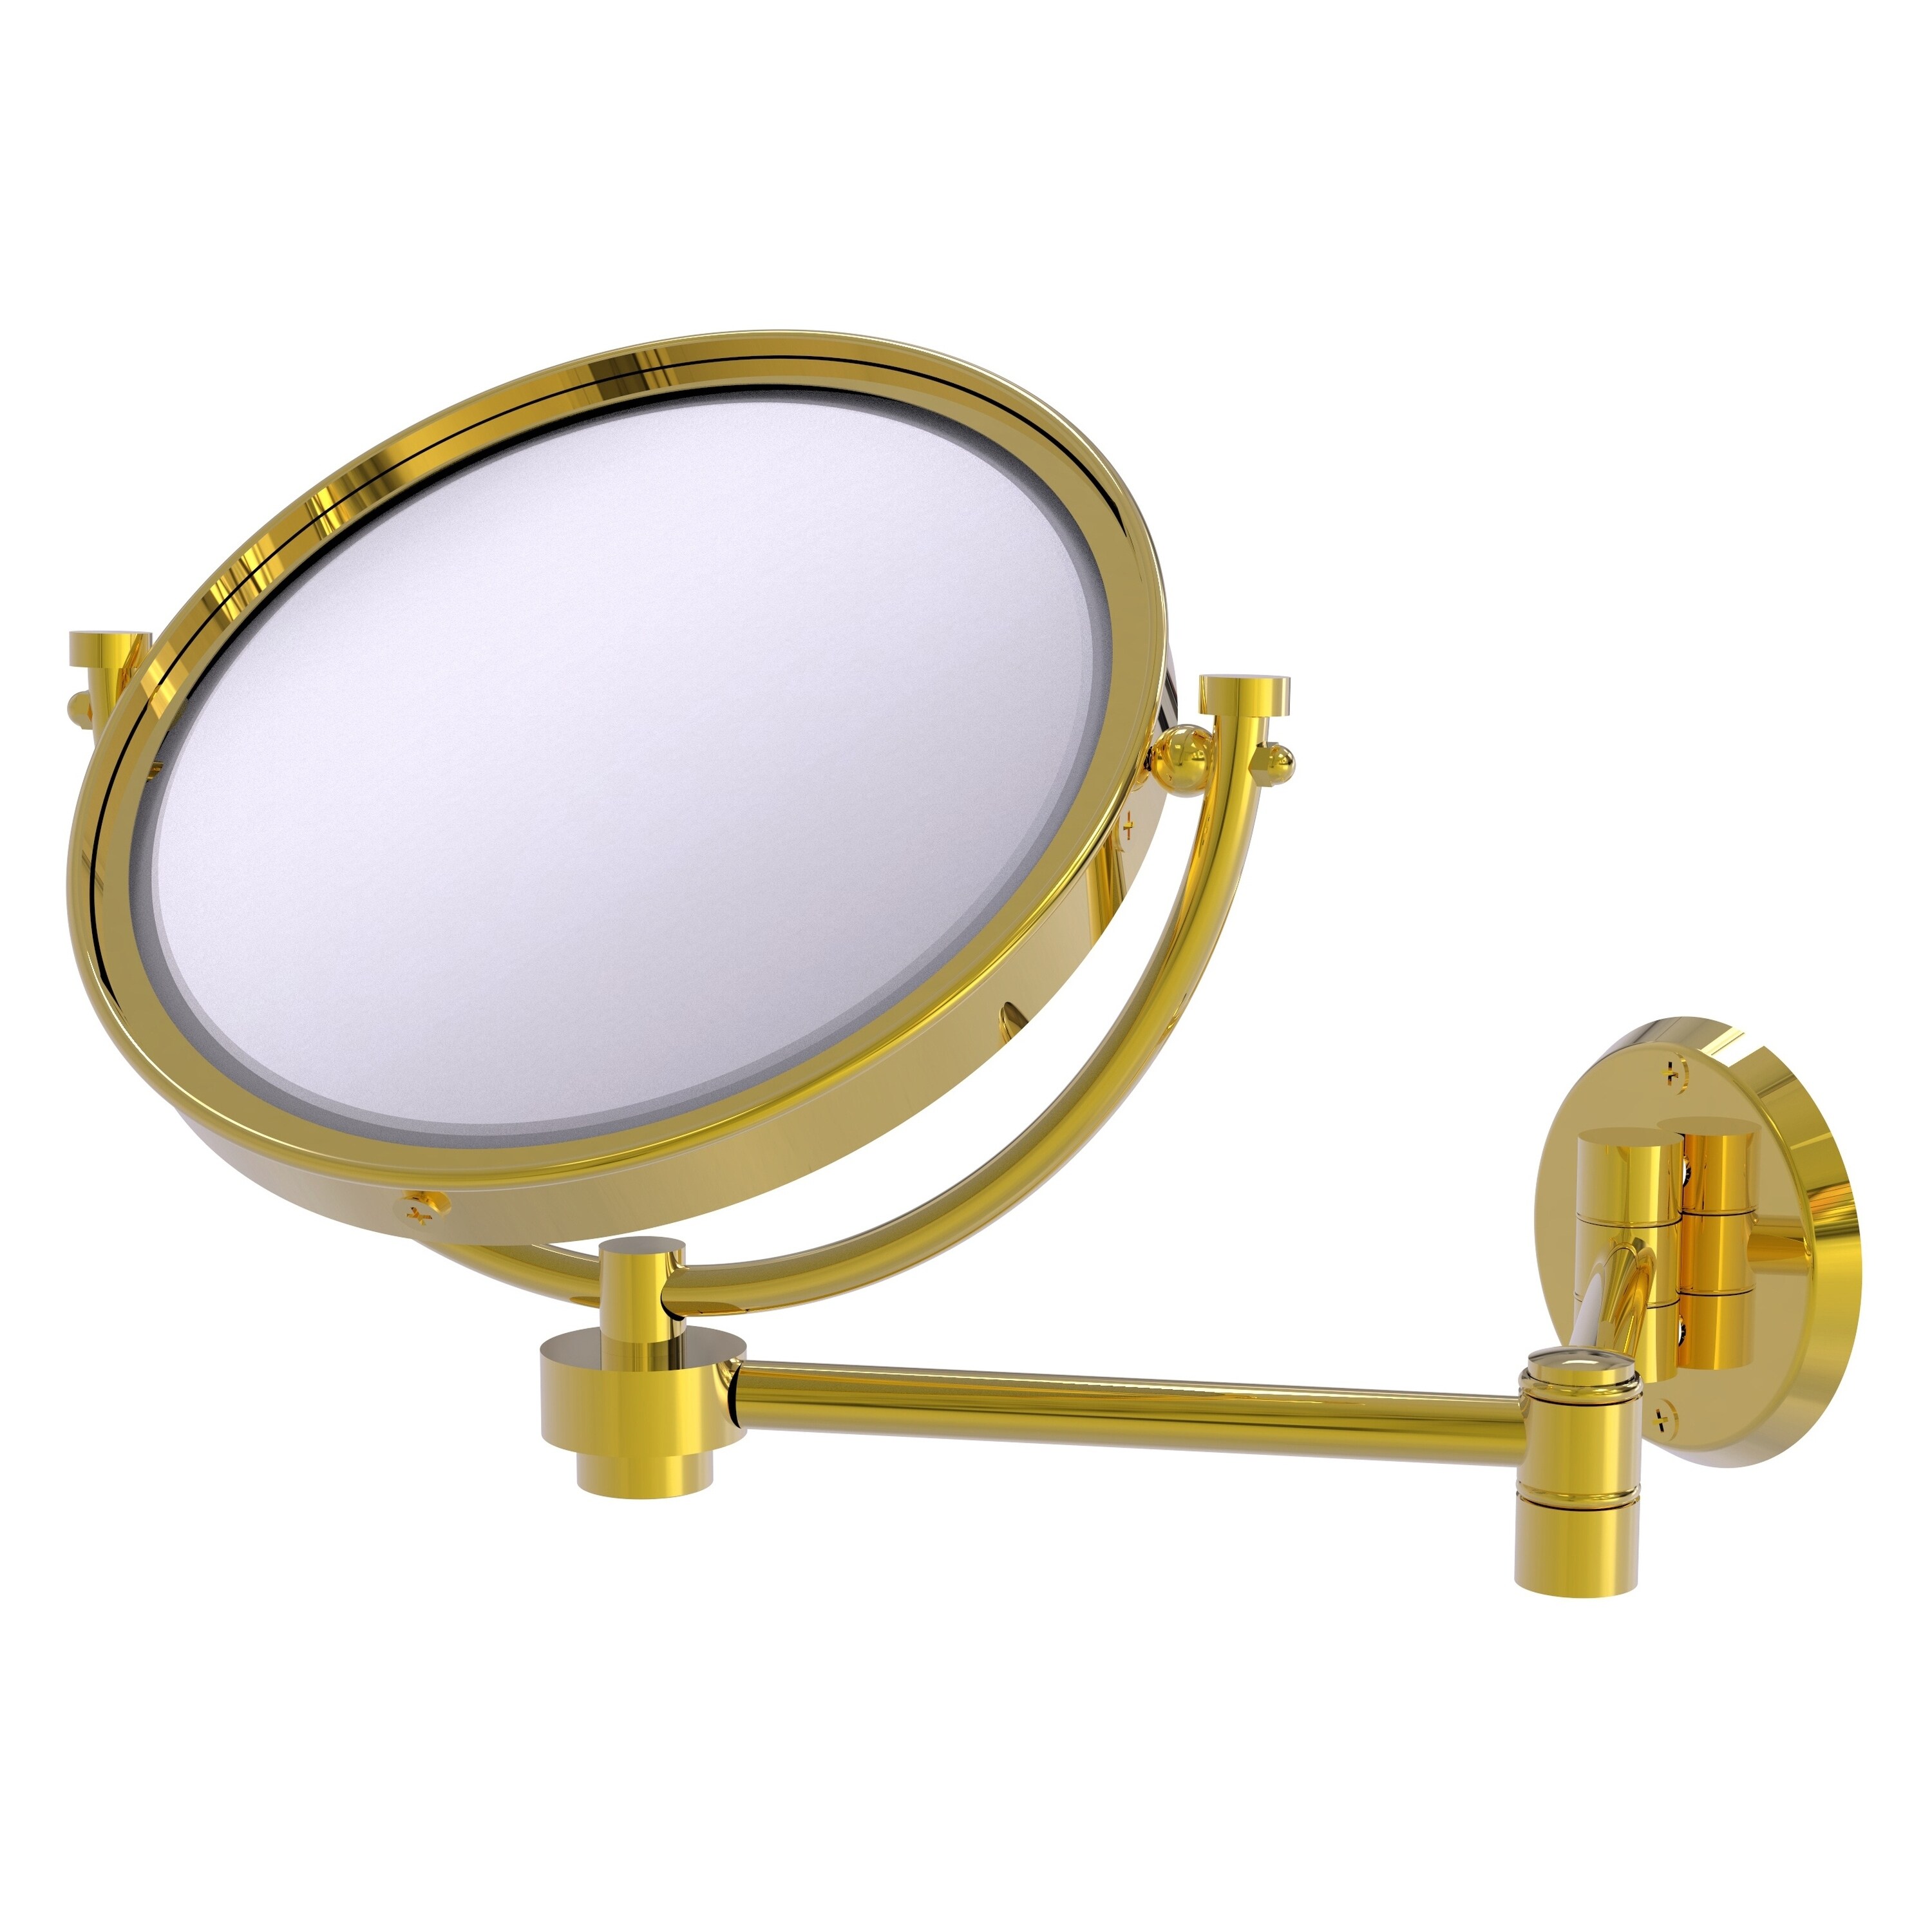 8-in x 10-in Polished Silver Double-sided 5X Magnifying Wall-mounted Vanity Mirror | - Allied Brass WM-6/4X-PB